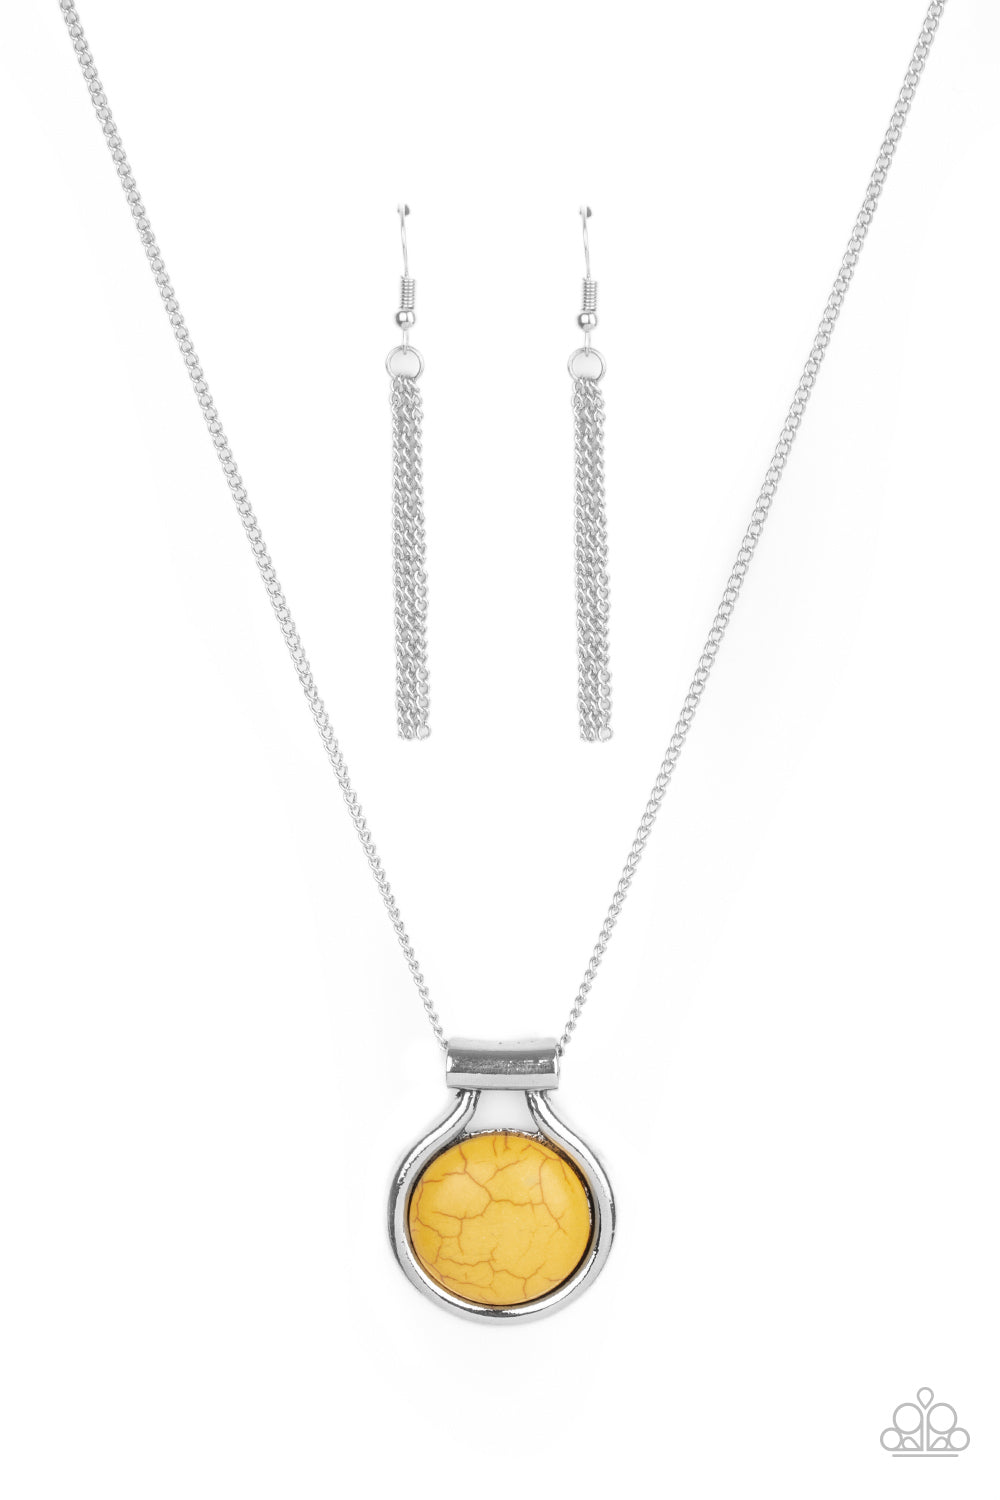 Patagonian Paradise - Yellow Necklace